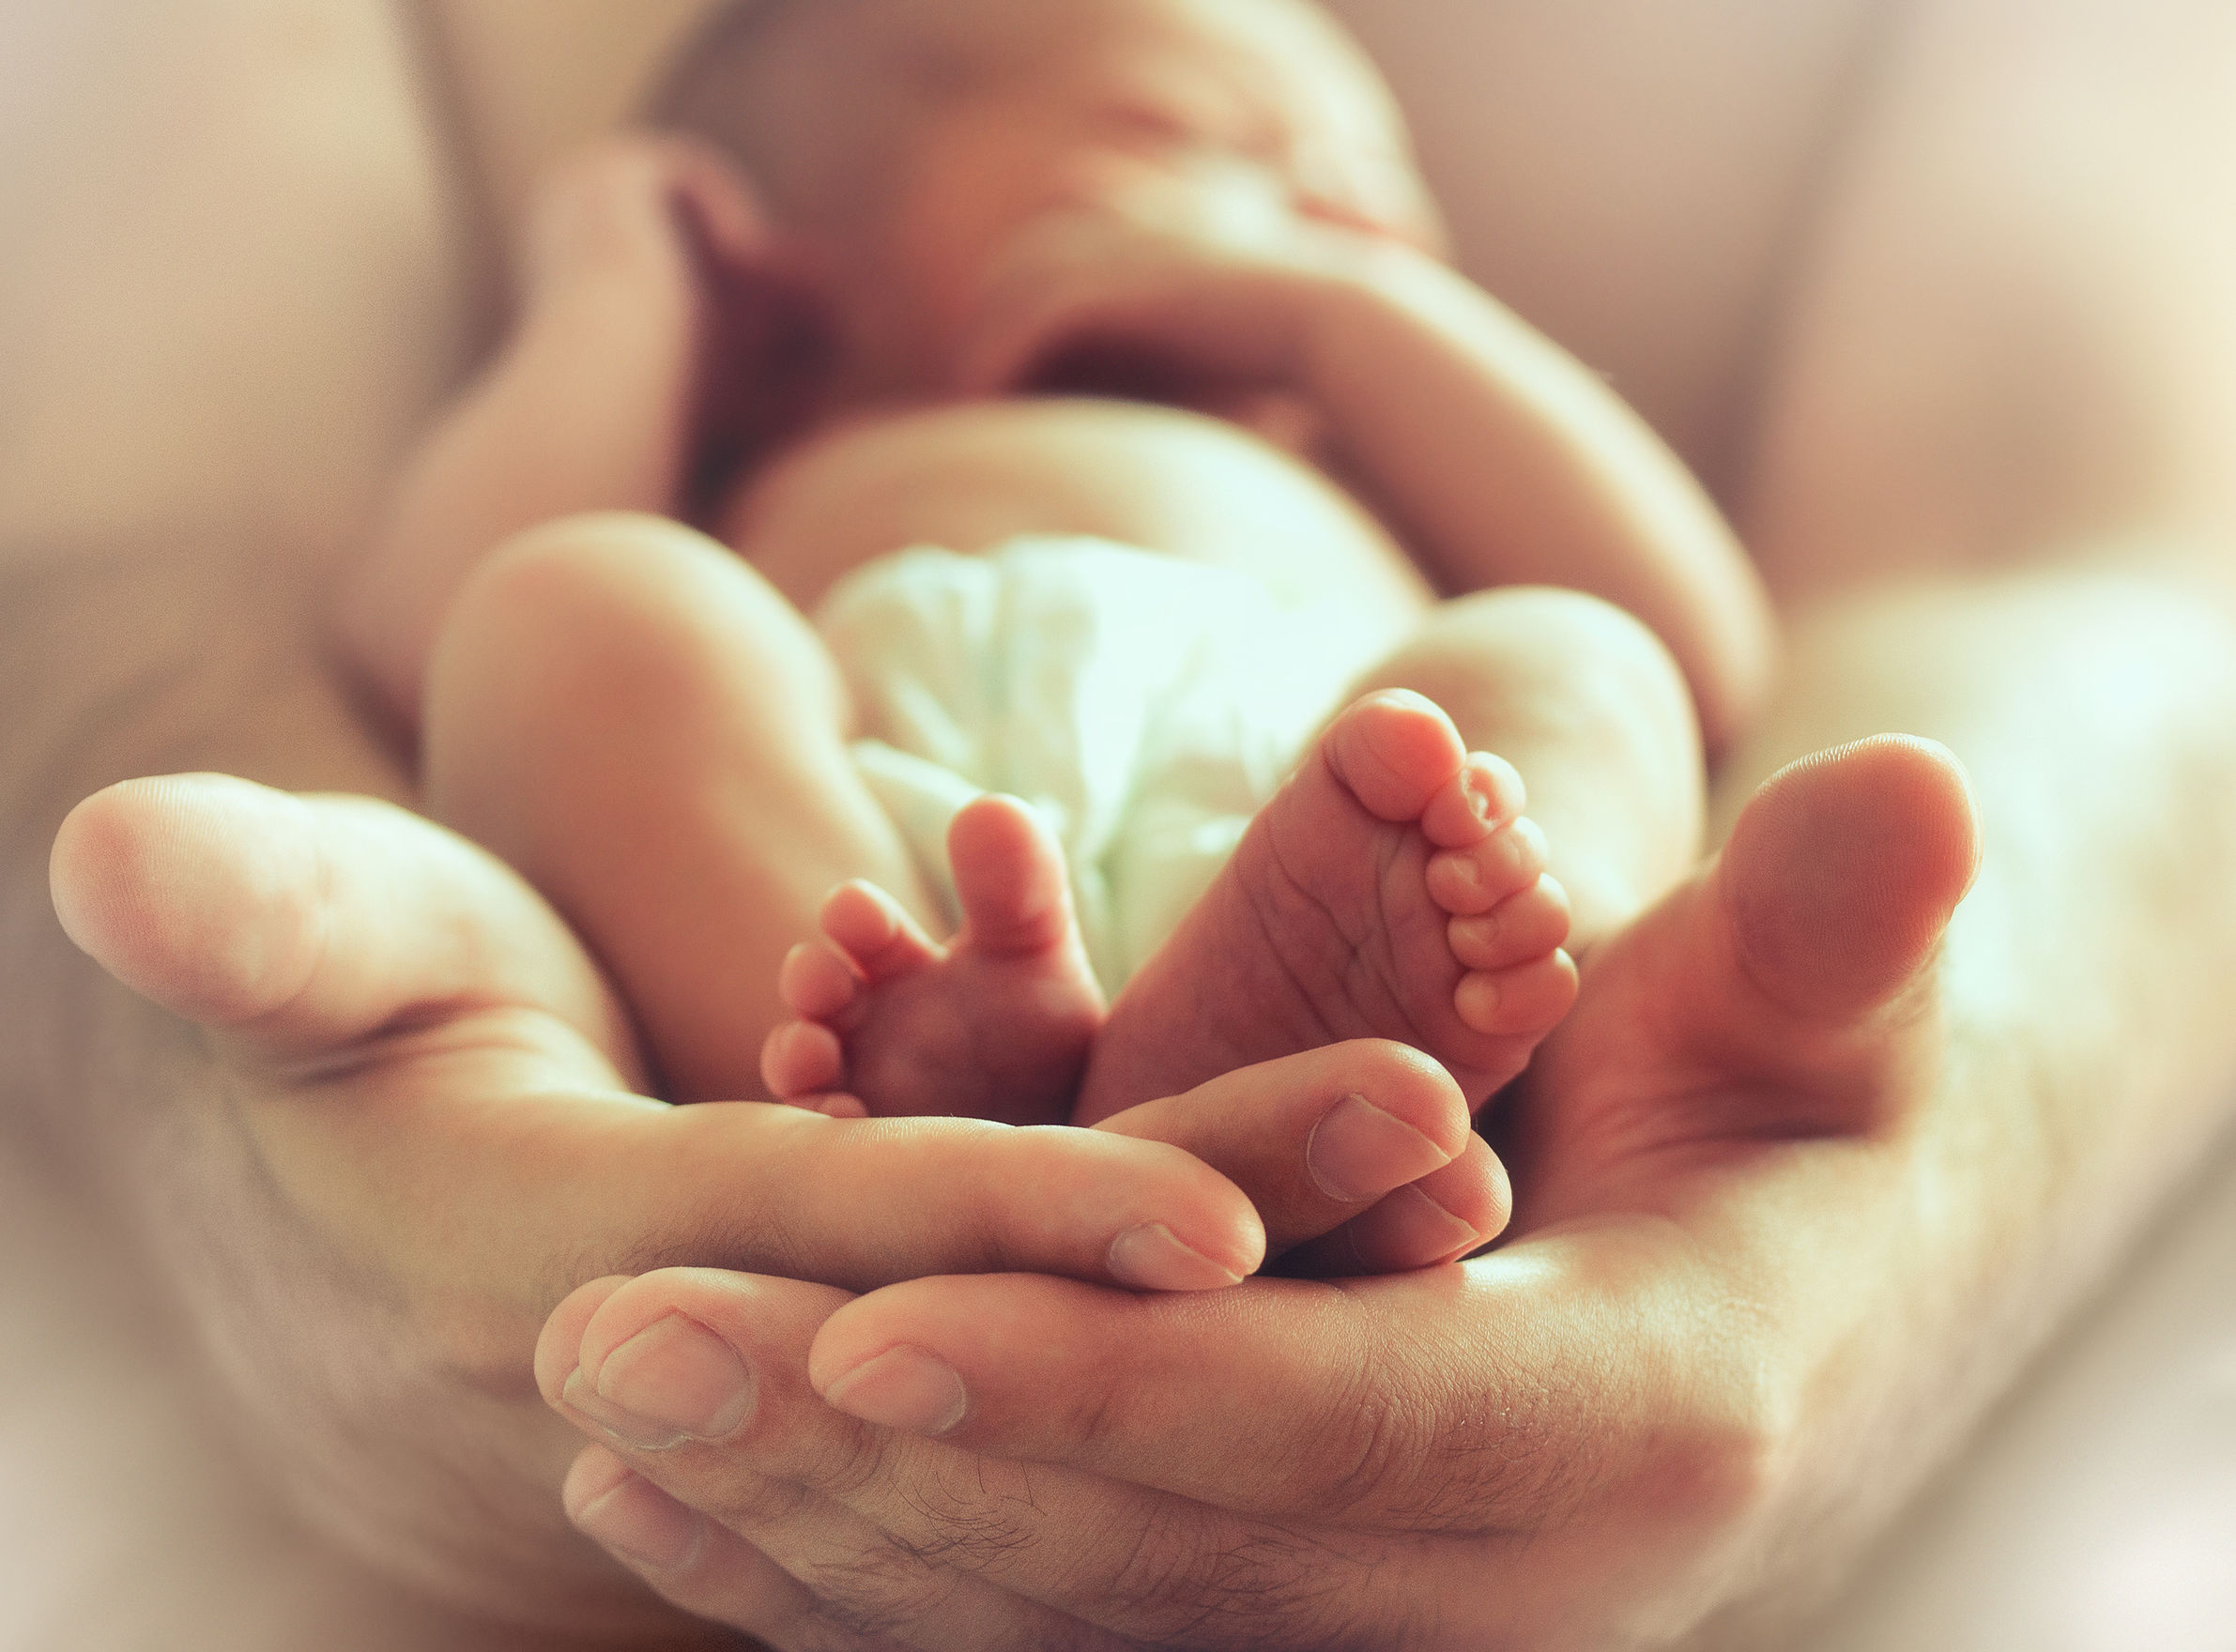 strong male hands holding sleeping newborn baby, photo with soft blur effect